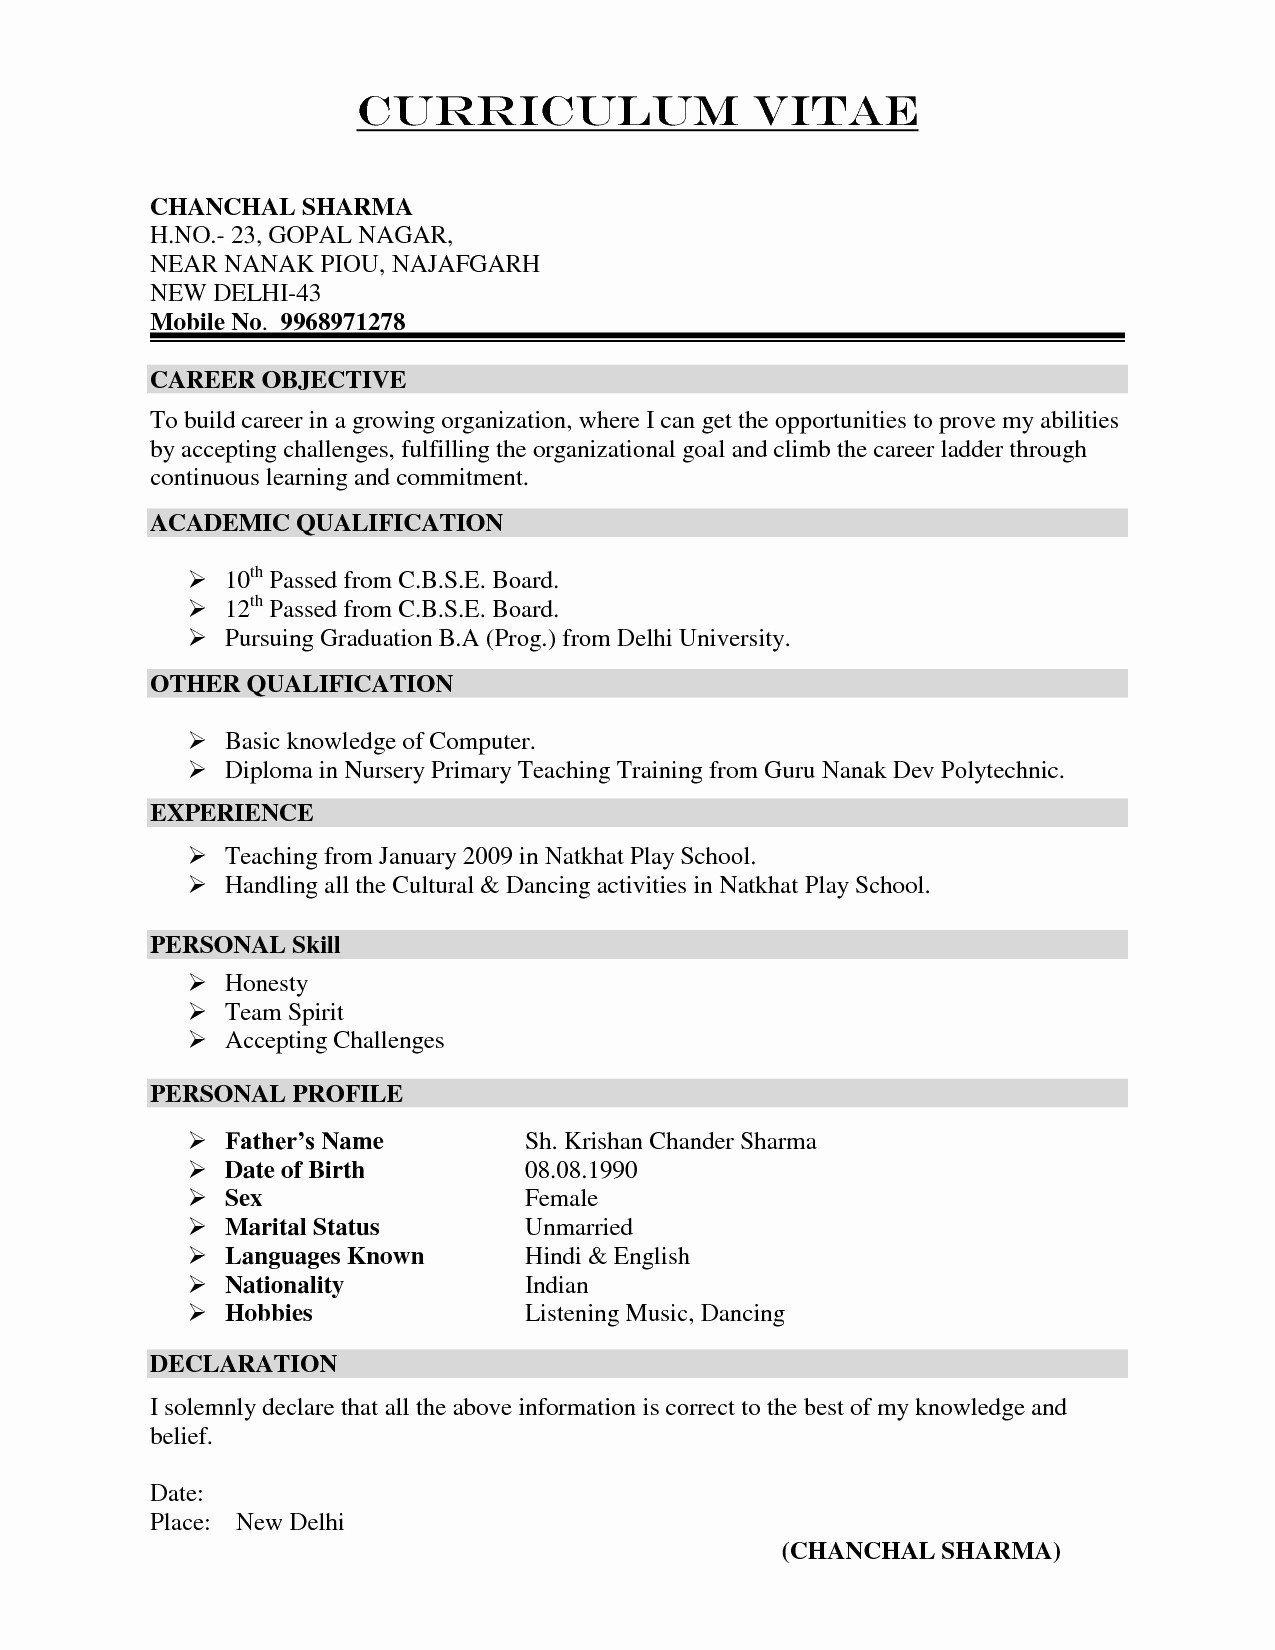 resume for letter of recommendation template Collection-Resume Cover Letter format Reference Sample Job Resume New New Resume Cover Letter formatted Resume 0d 12-f